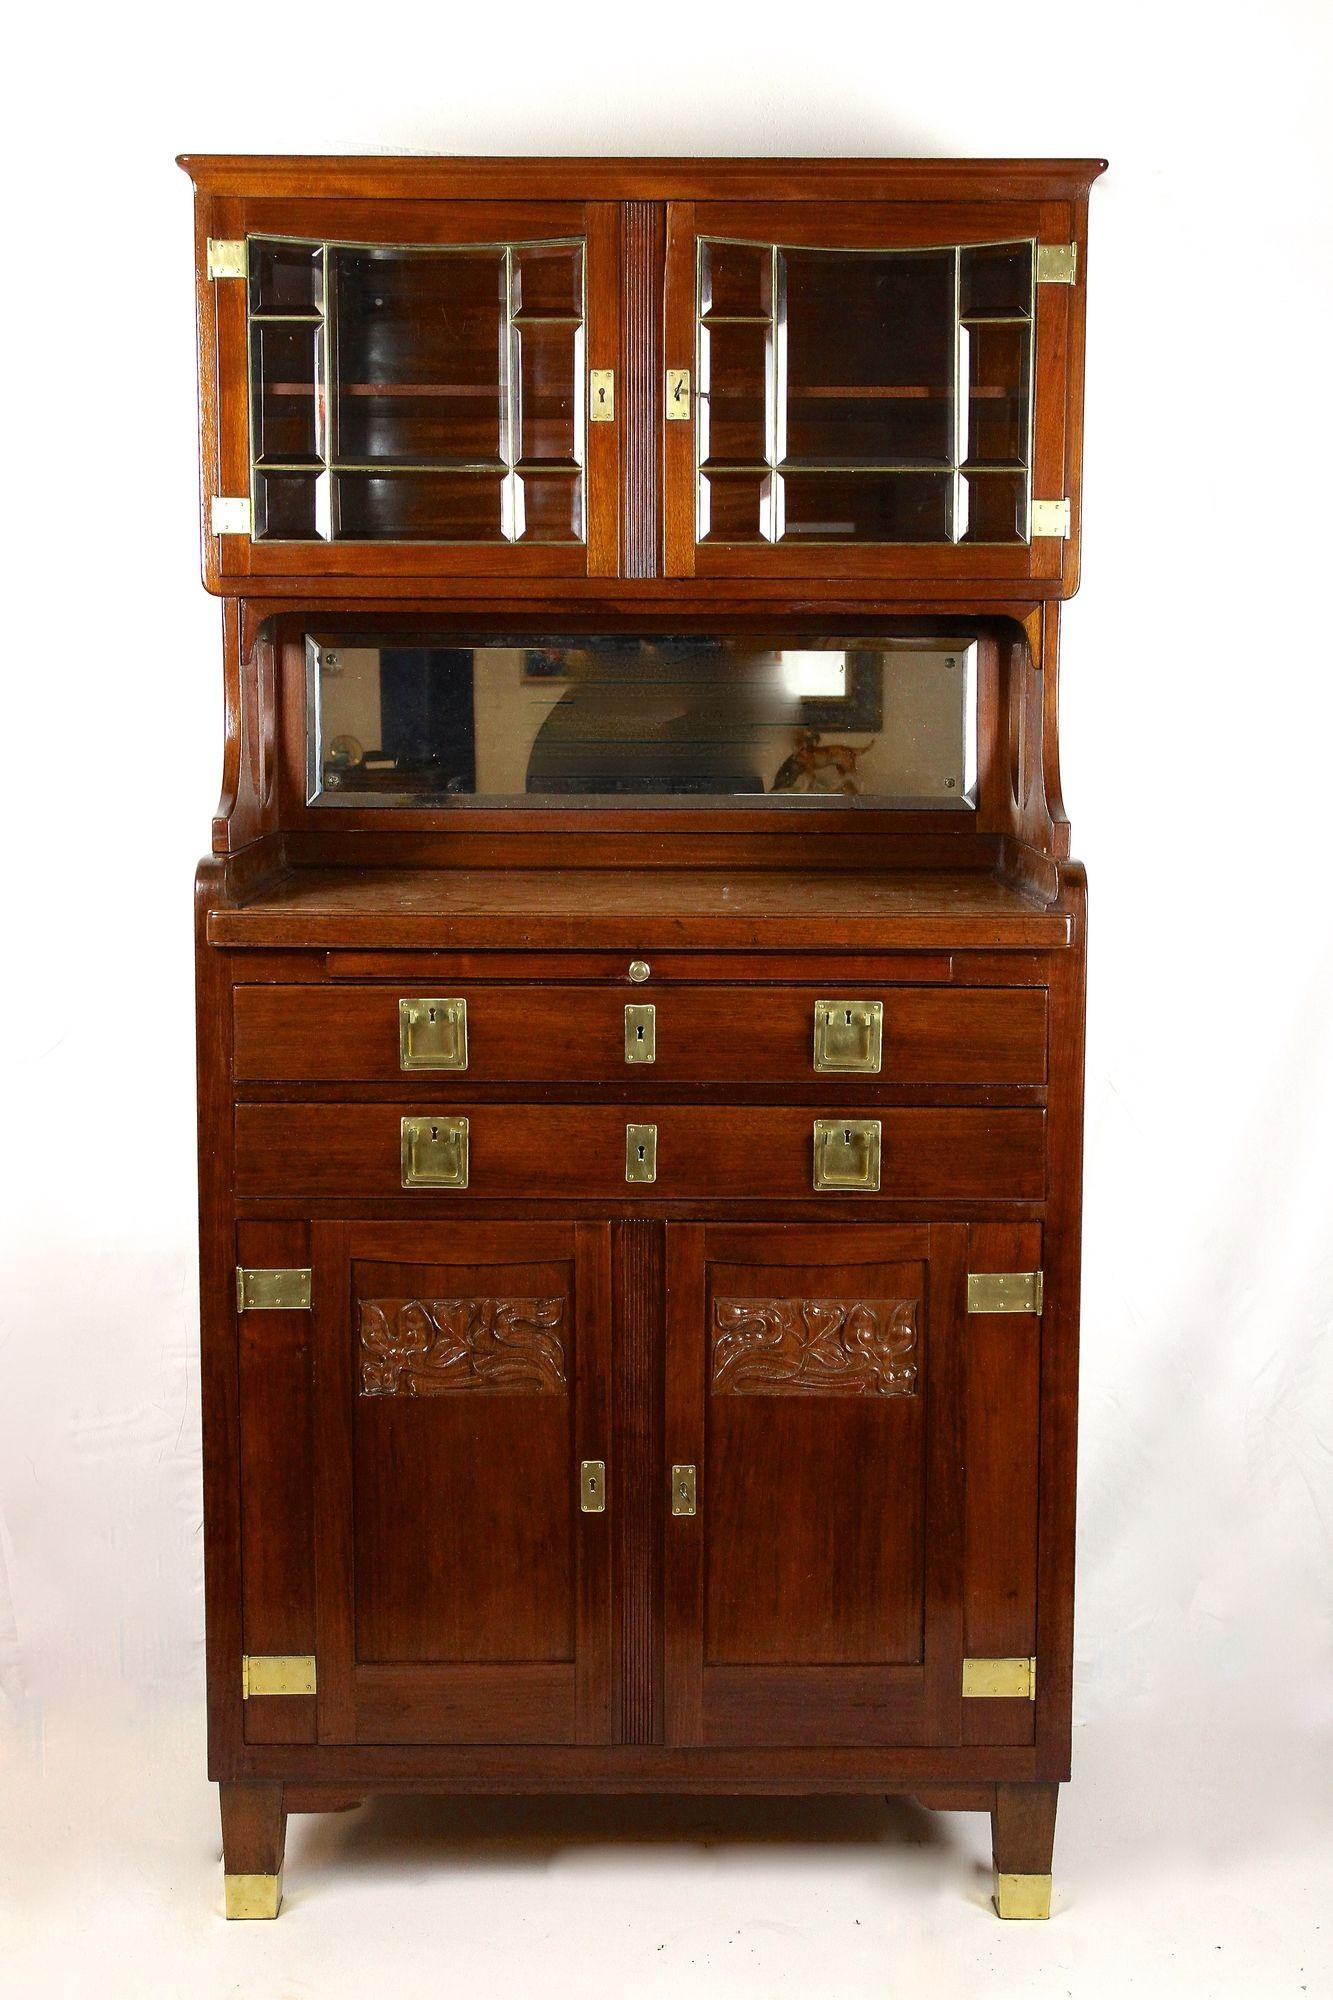 Absolutely beautiful, rare Art Nouveau mahogany buffet cabinet out of Austria around 1910. Consisting of two parts, the extraordinary designed lower part impresses with lovely floral themed carvings in the two doors and provides two additional